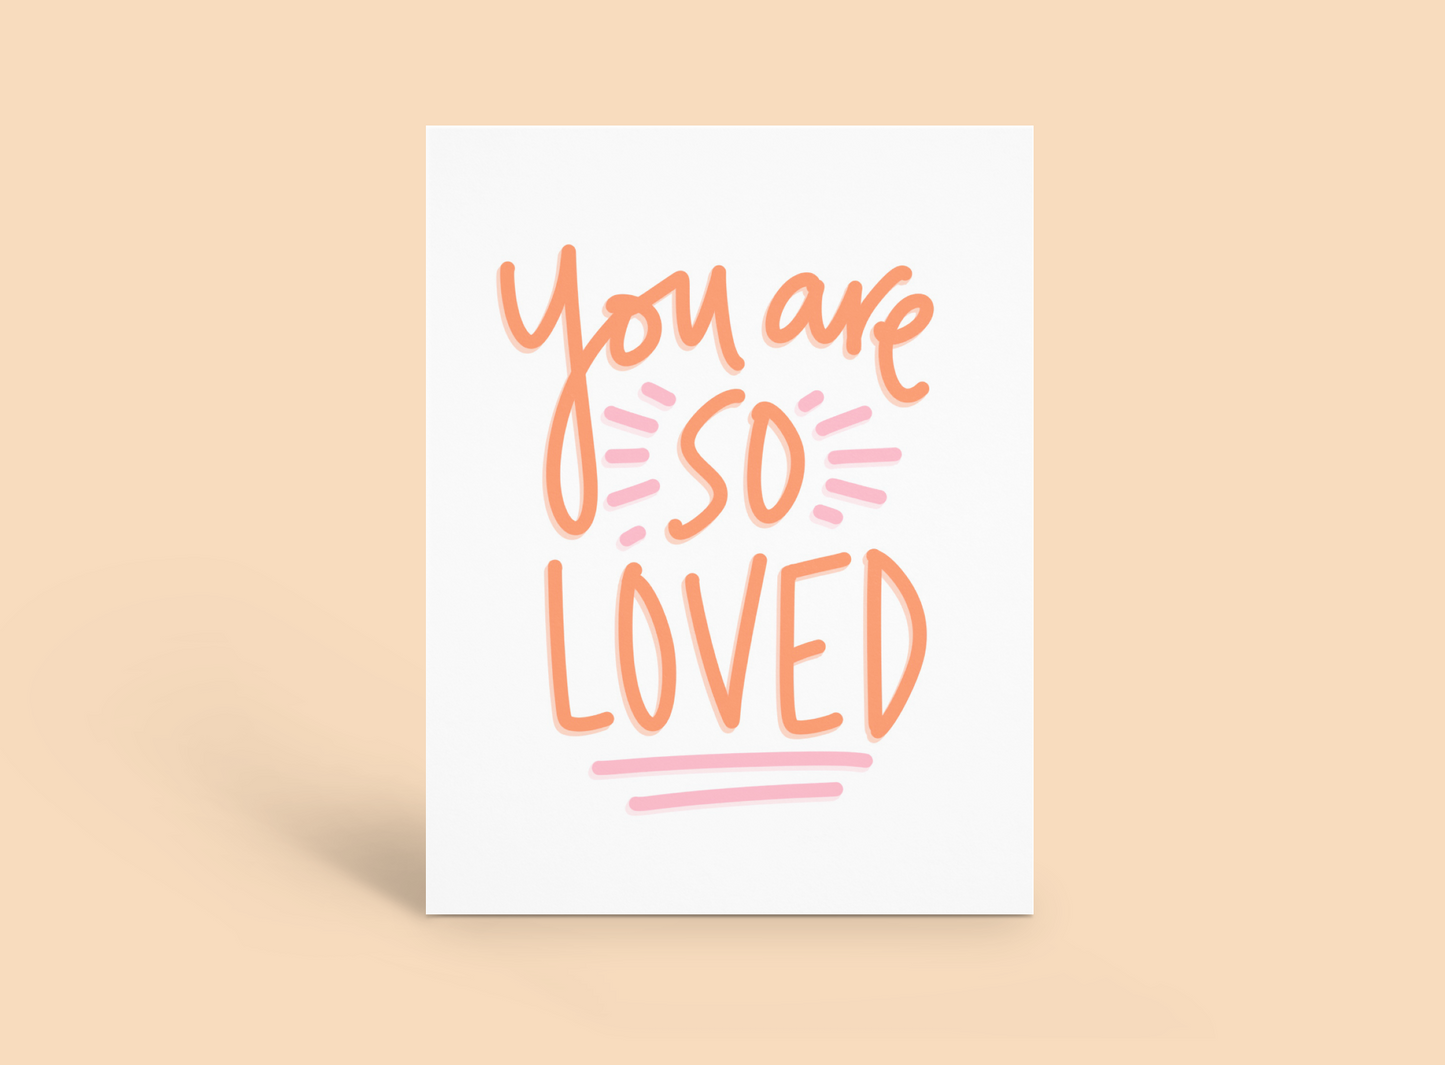 You Are So Loved